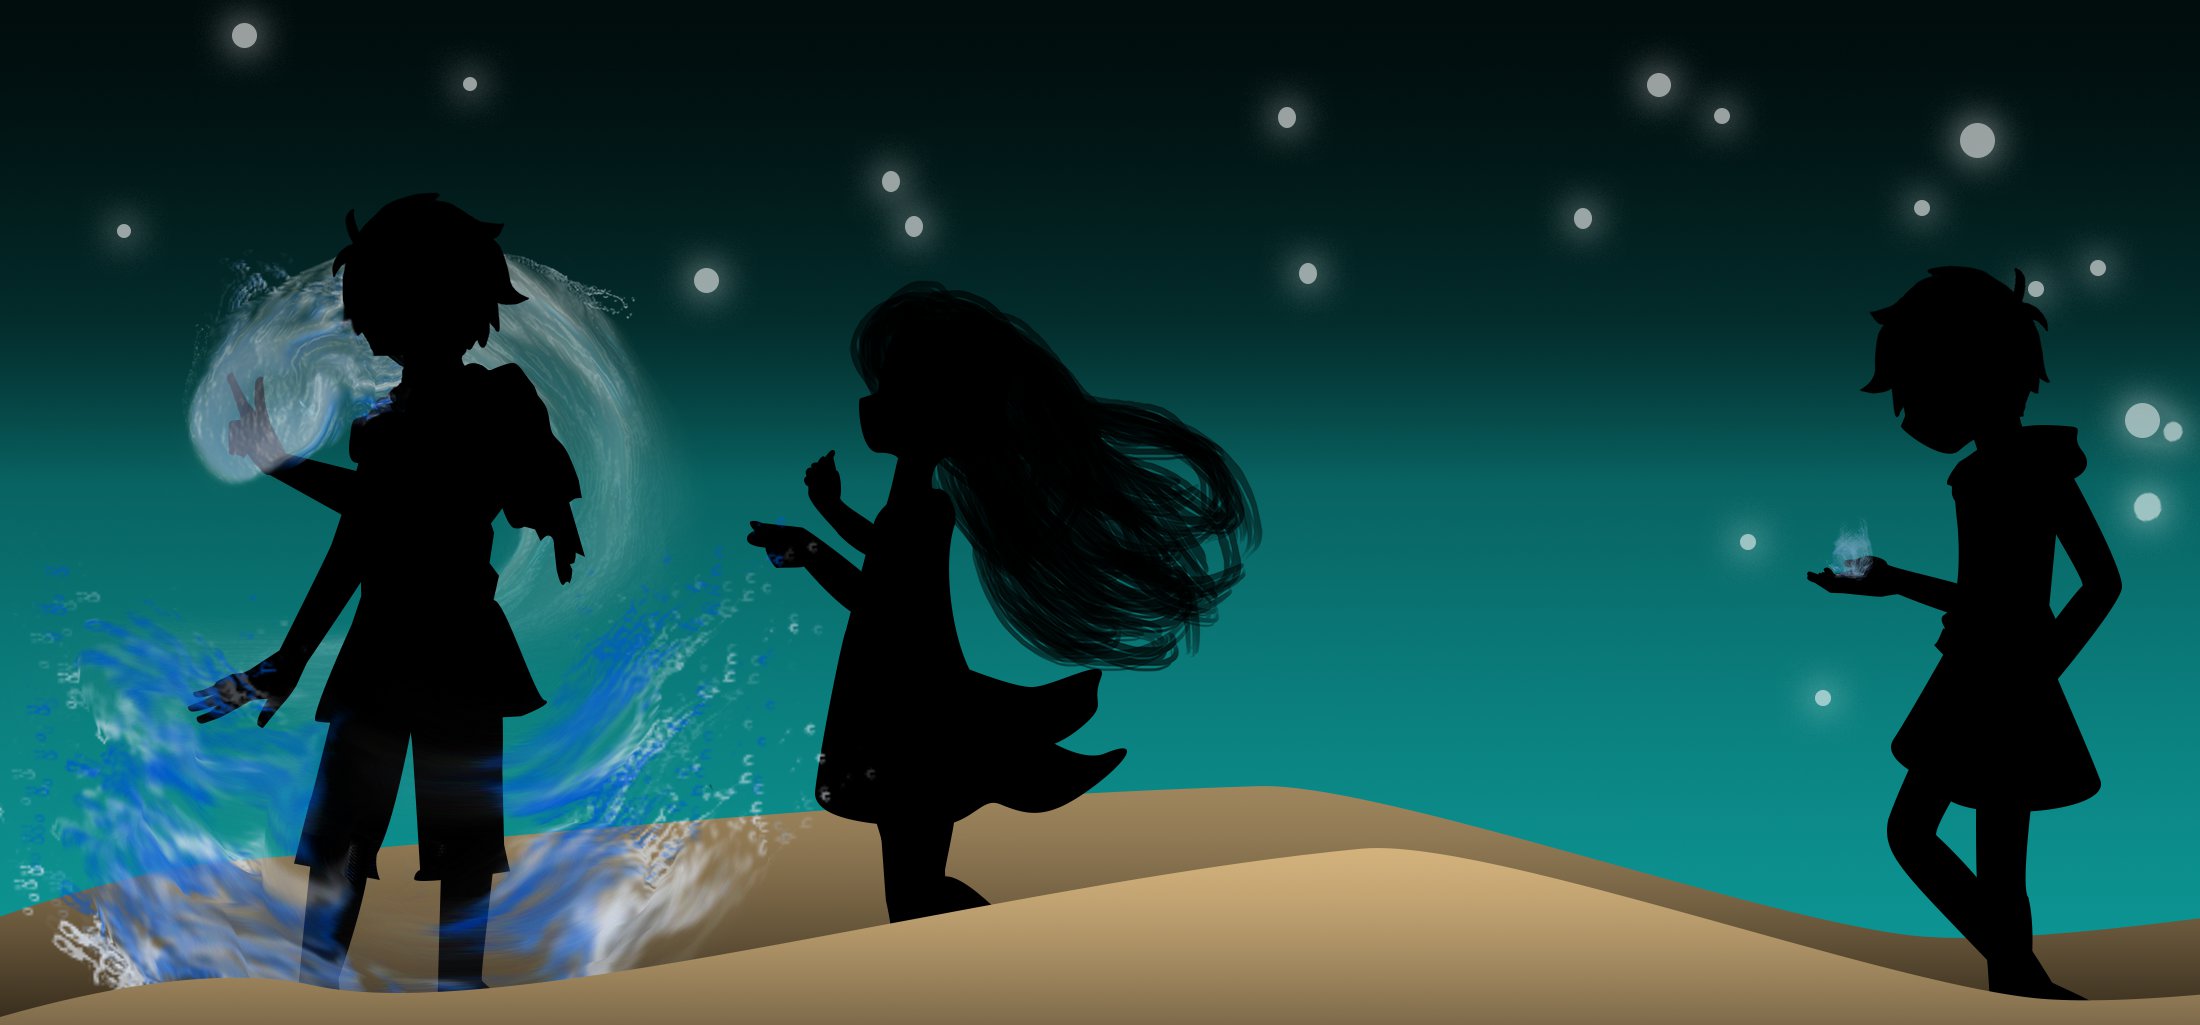 A somber silhouette of Roger in the desert. On the left, we see the silhouette of a male mage casting an impressive water spell. The silhouette of a female mage is shown beside, looking impressed by the display. Far away from them, on the right edge of the image, we see the silhouette of Roger looking down at a small droplet of water in his hand.